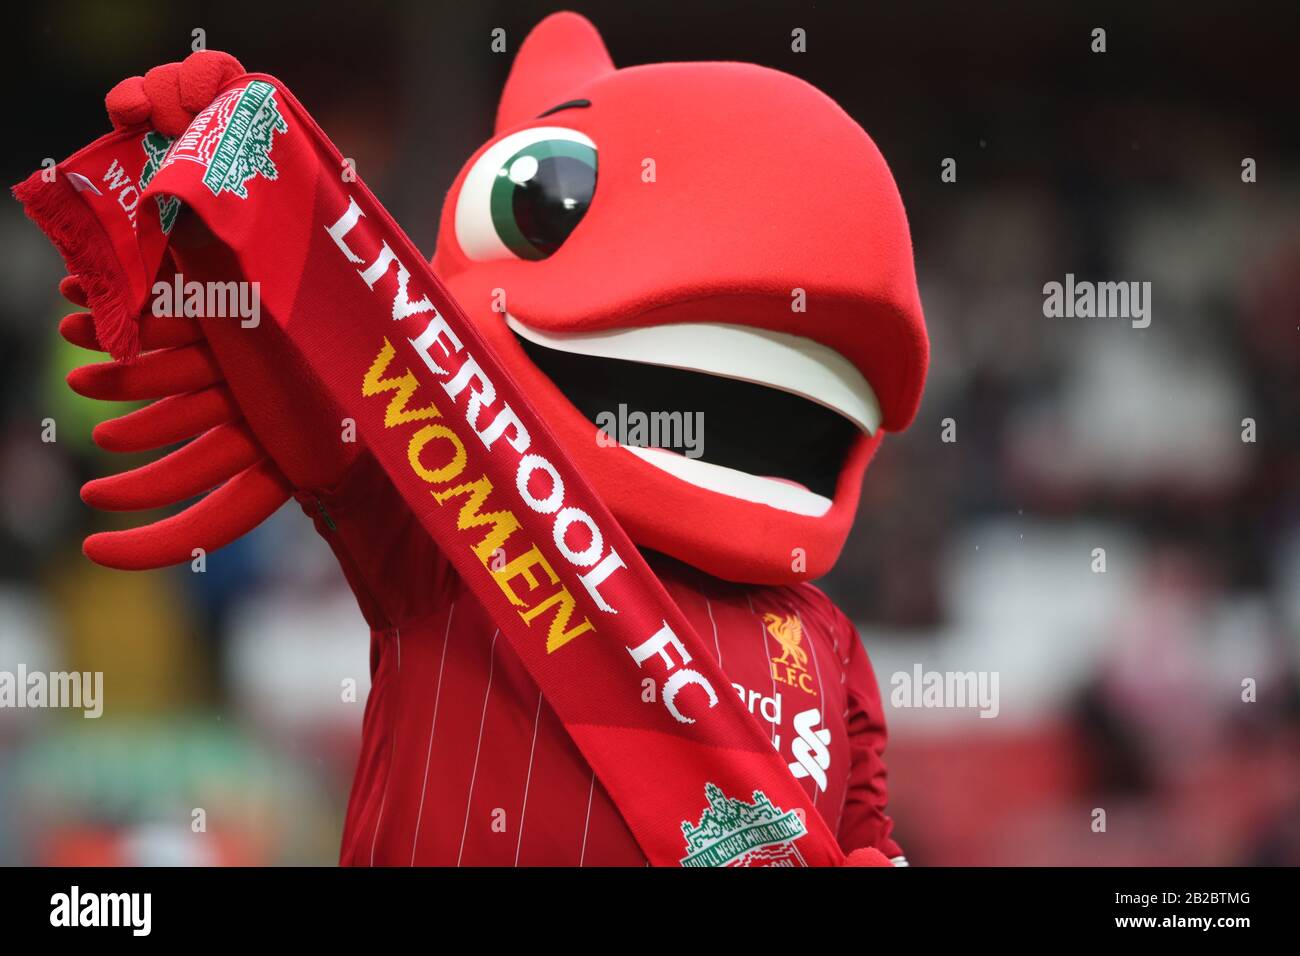 Liverpool FC club mascot holds Liverpool Women's scarf during the FA Women's Super League match at Anfield, Liverpool. Stock Photo